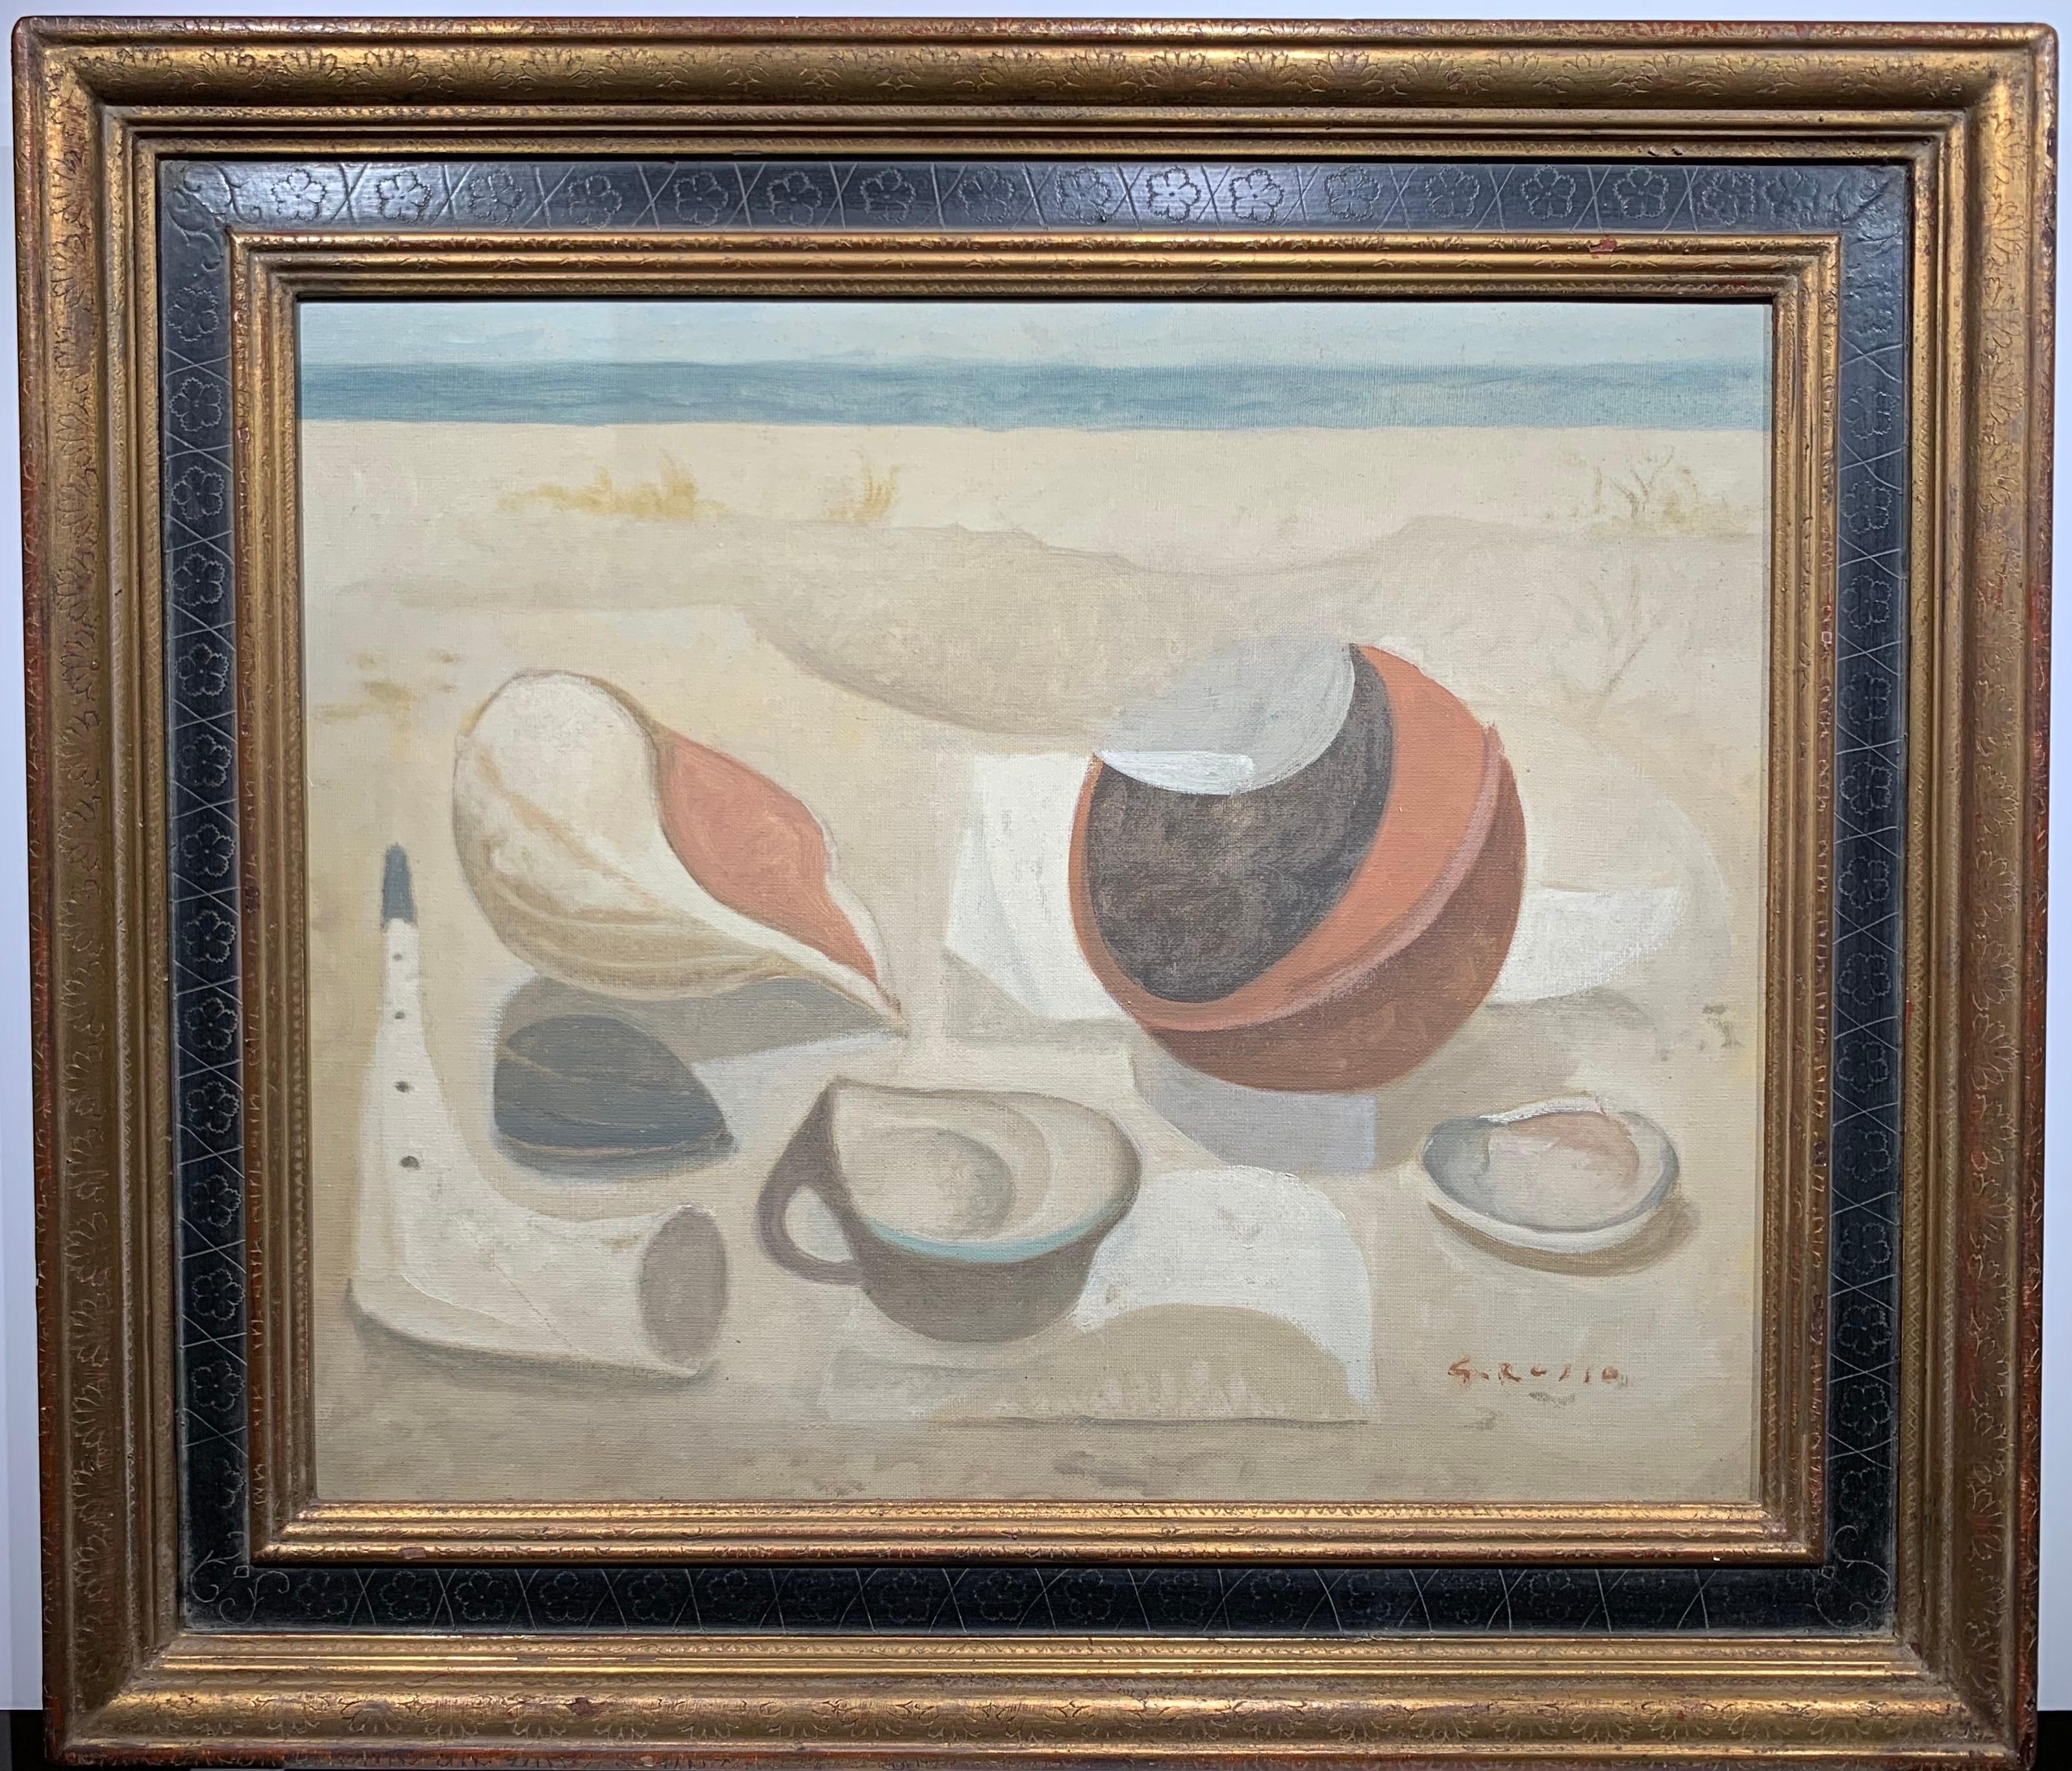 Beautiful surrealist beach landscape by Italian artist, Enzo Russo (b.1936). Still Life by the Sea, ca. 1960. Oil on linen canvas, 20 x 24 inches. Framed measurement: 27 x 31 inches. Signed lower right. Excellent condition with one dark scratch in